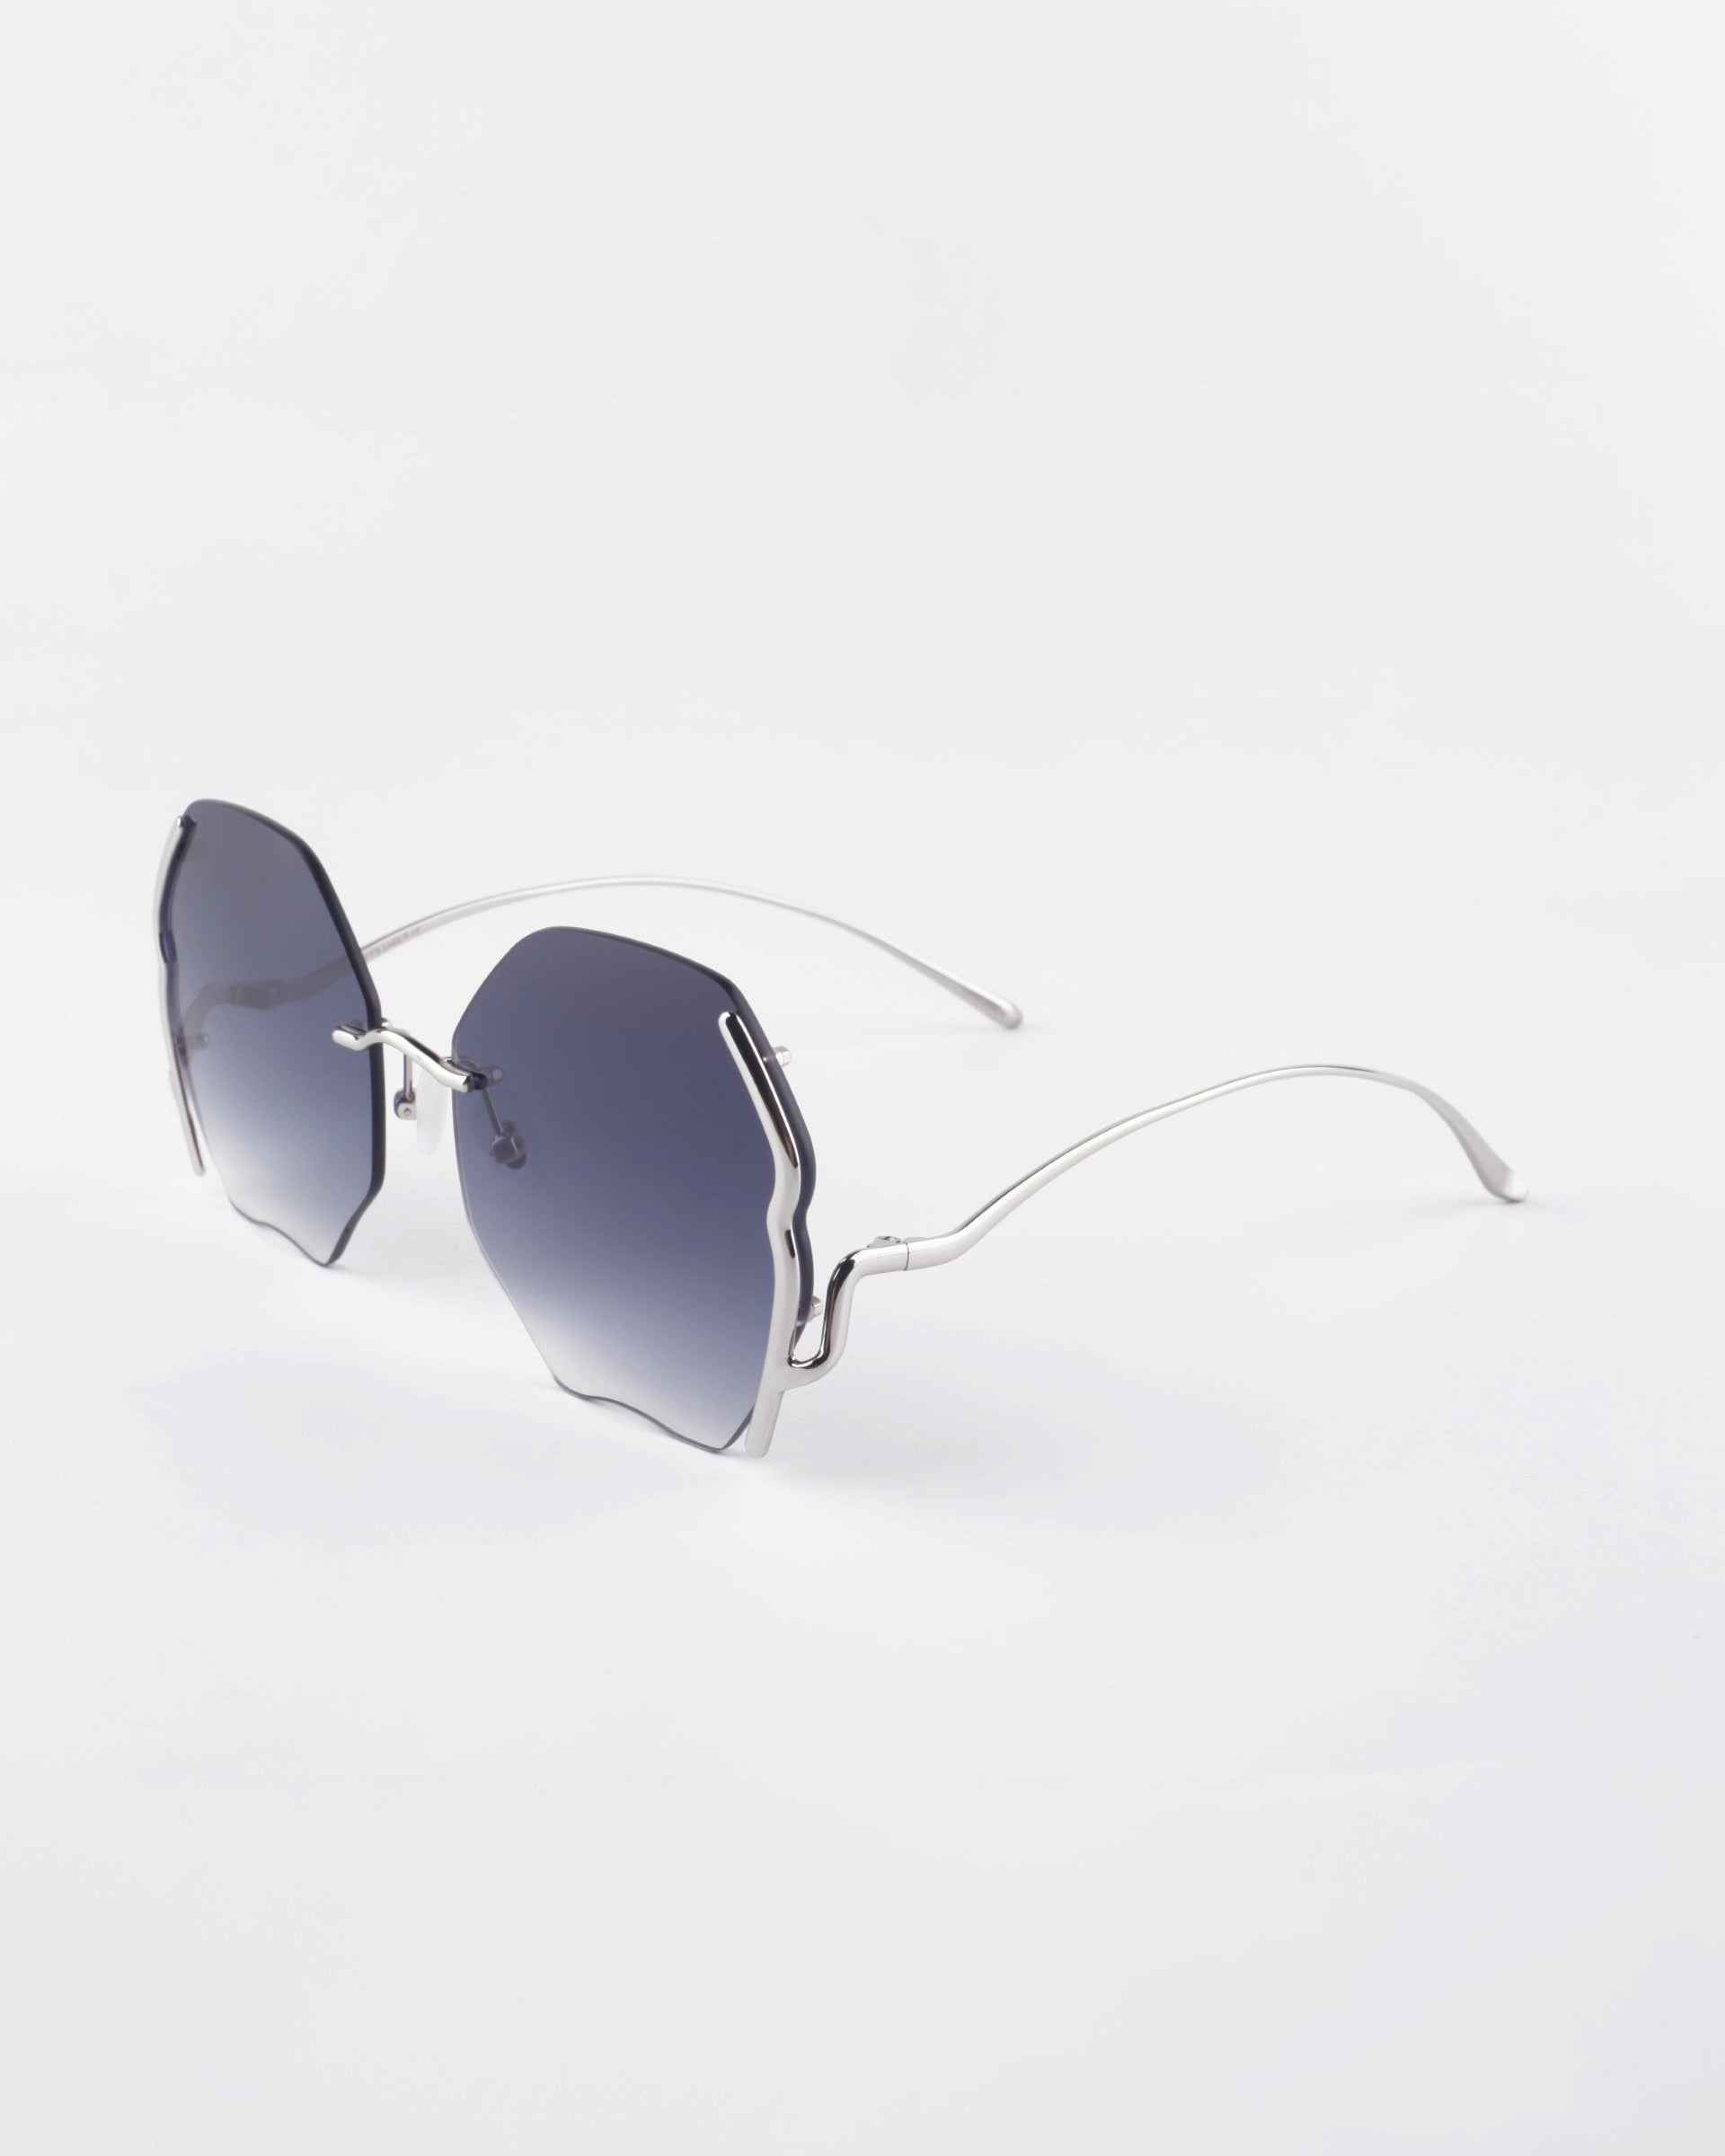 Fashionable Art Deco Century sunglasses by For Art’s Sake® with uniquely shaped, frameless dark lenses and sleek, curved gold-plated stainless steel temples placed against a white background.